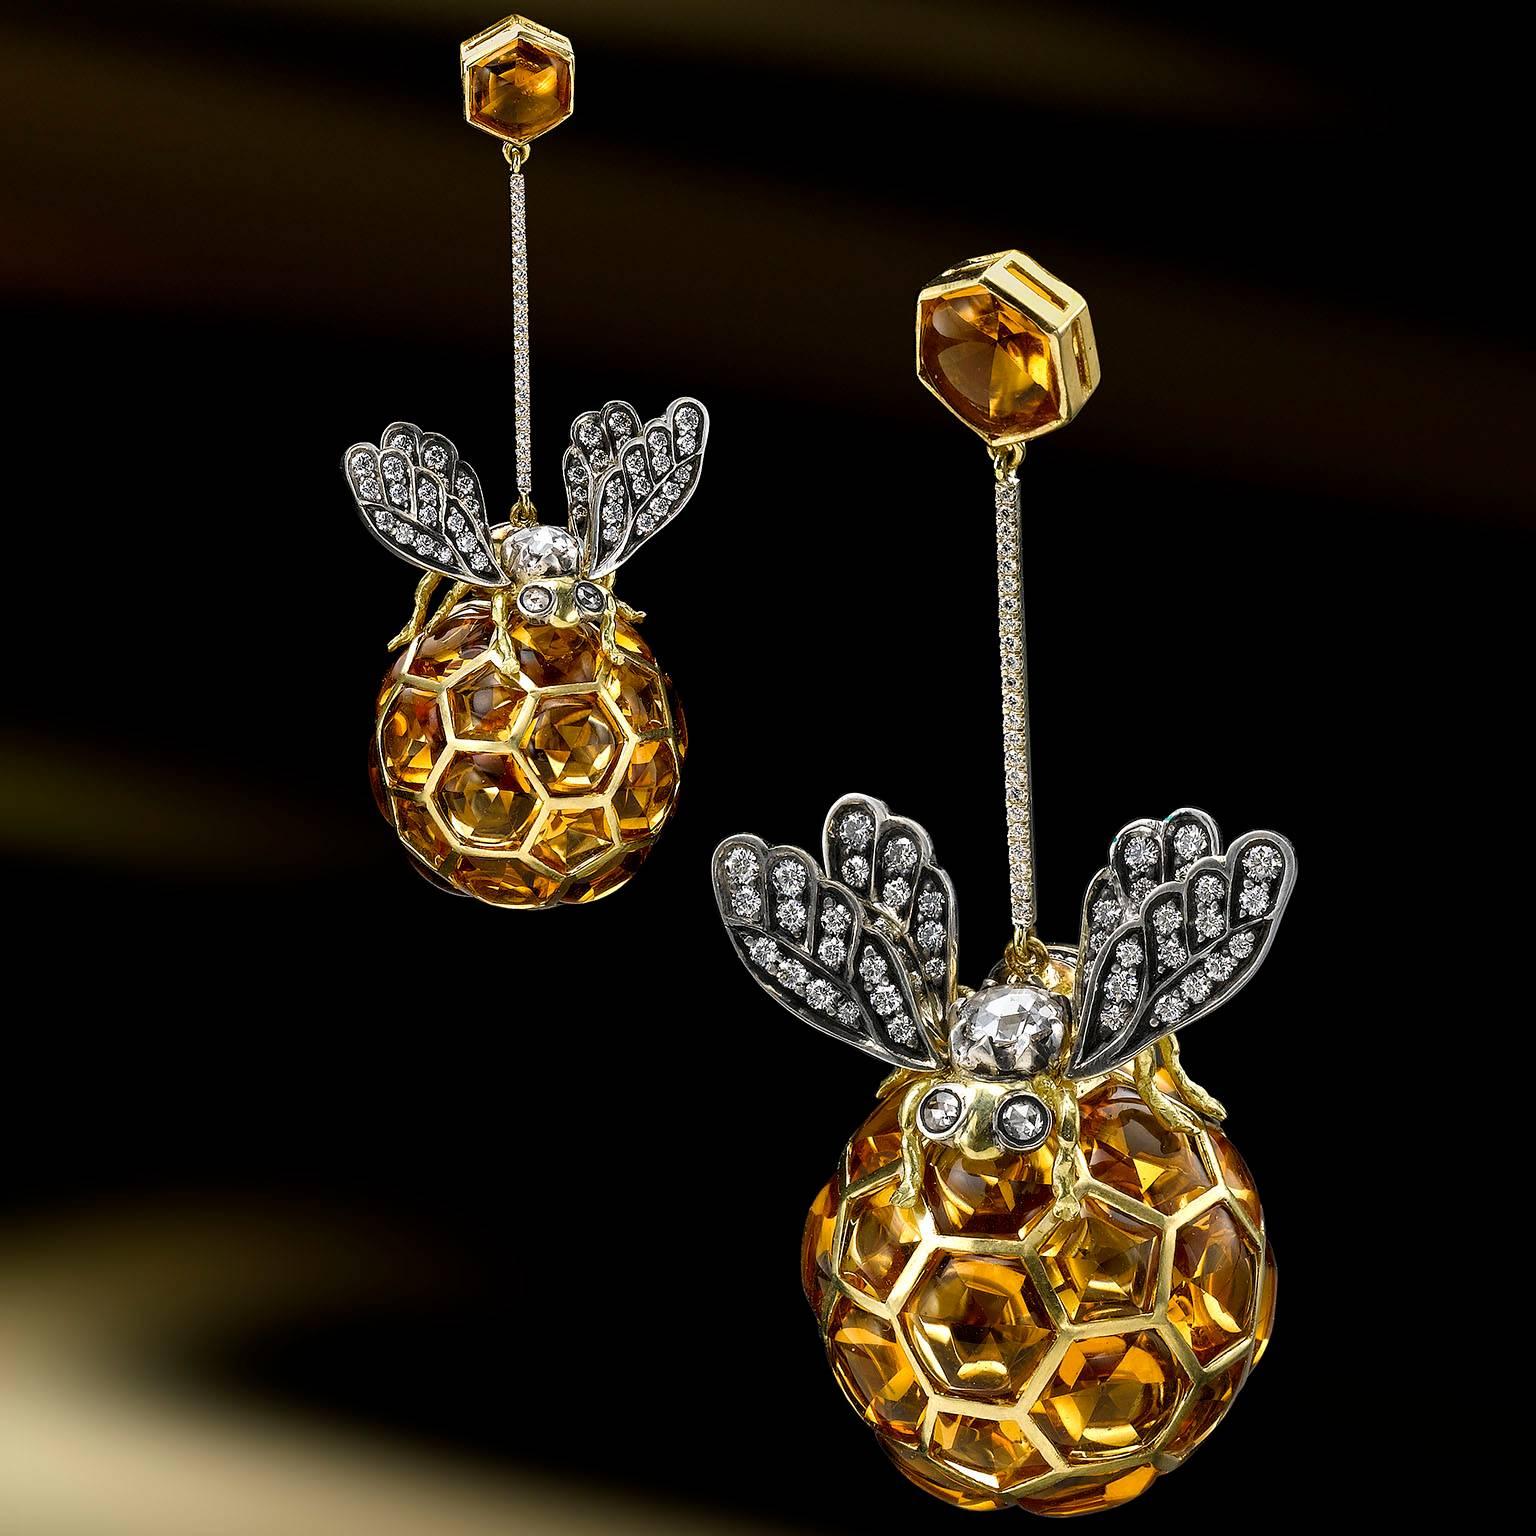 These elegant drop earrings are very light weight for their size and comfortable to  wear. The18k Gold and silver bees set with diamonds and sit on the 18k gold honey balls set with Madeira citrines. Suspended from a honeycomb stud and an 18k. gold